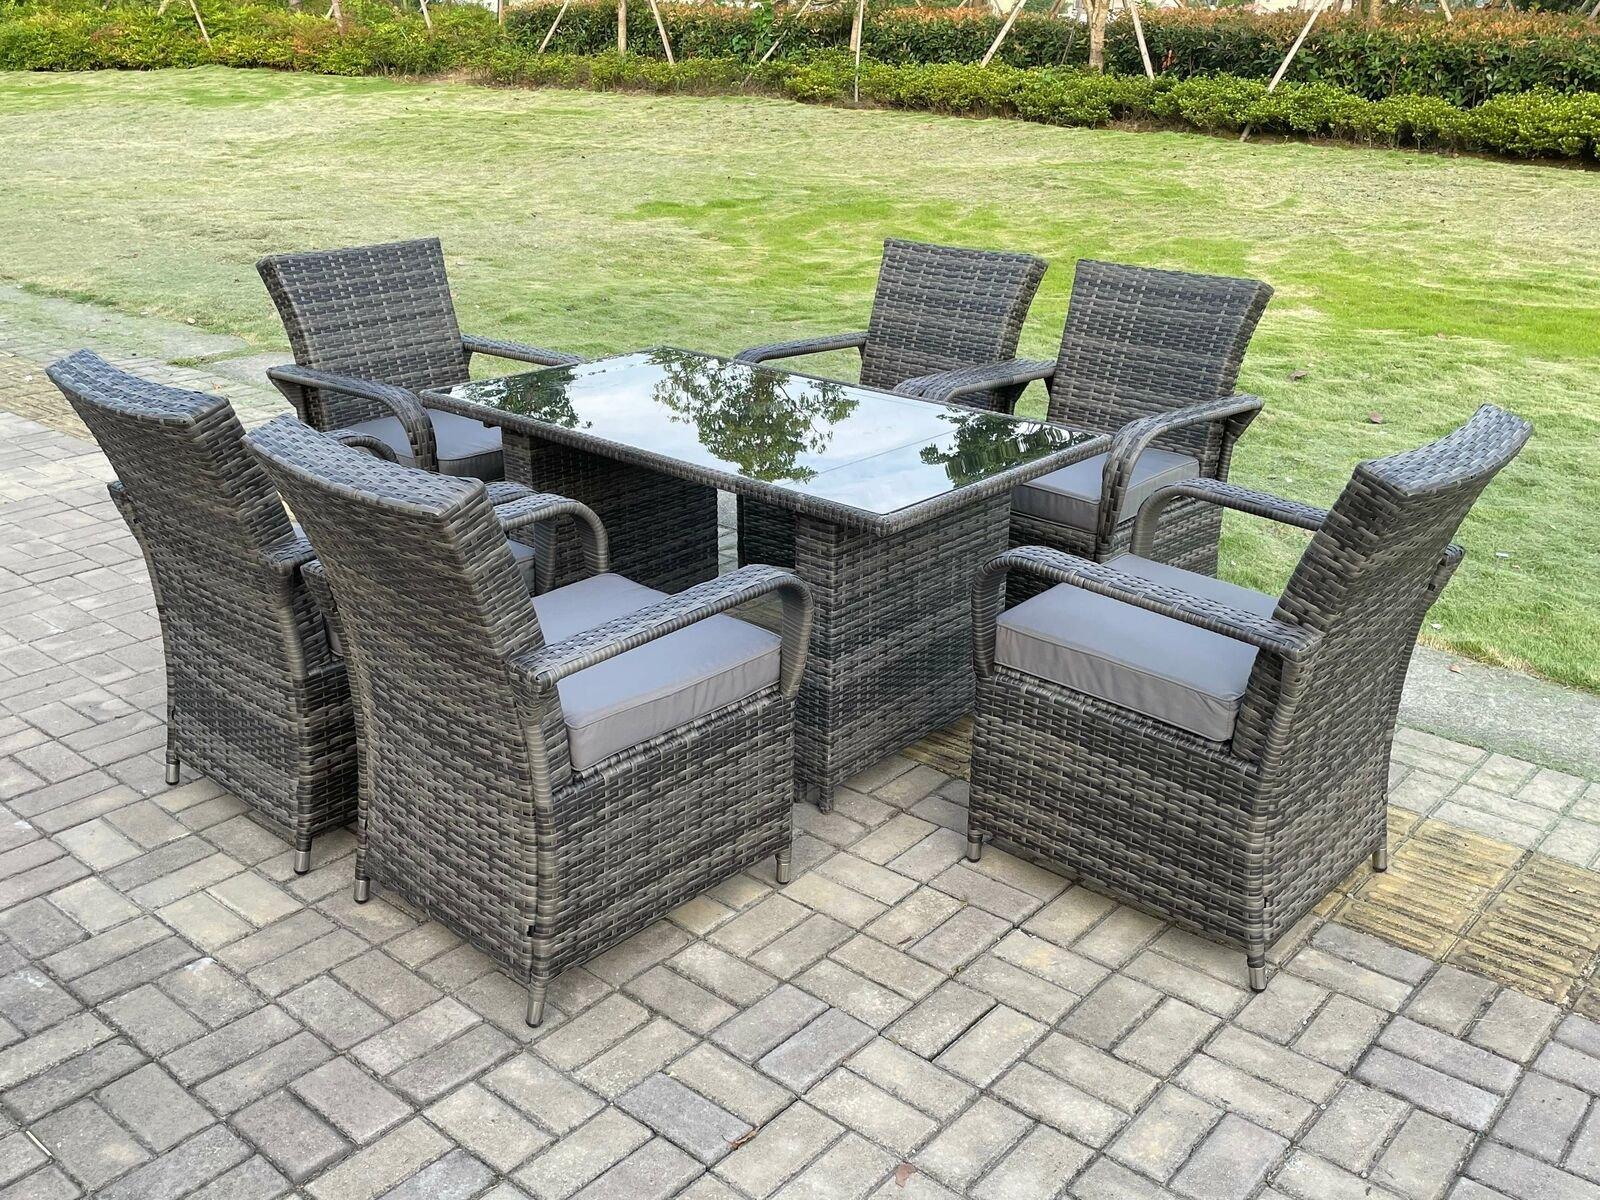 Rattan Garden Furniture Dining Set Table And Chairs WiCker Patio Outdoor 6 Chairs Plus Rectangular T